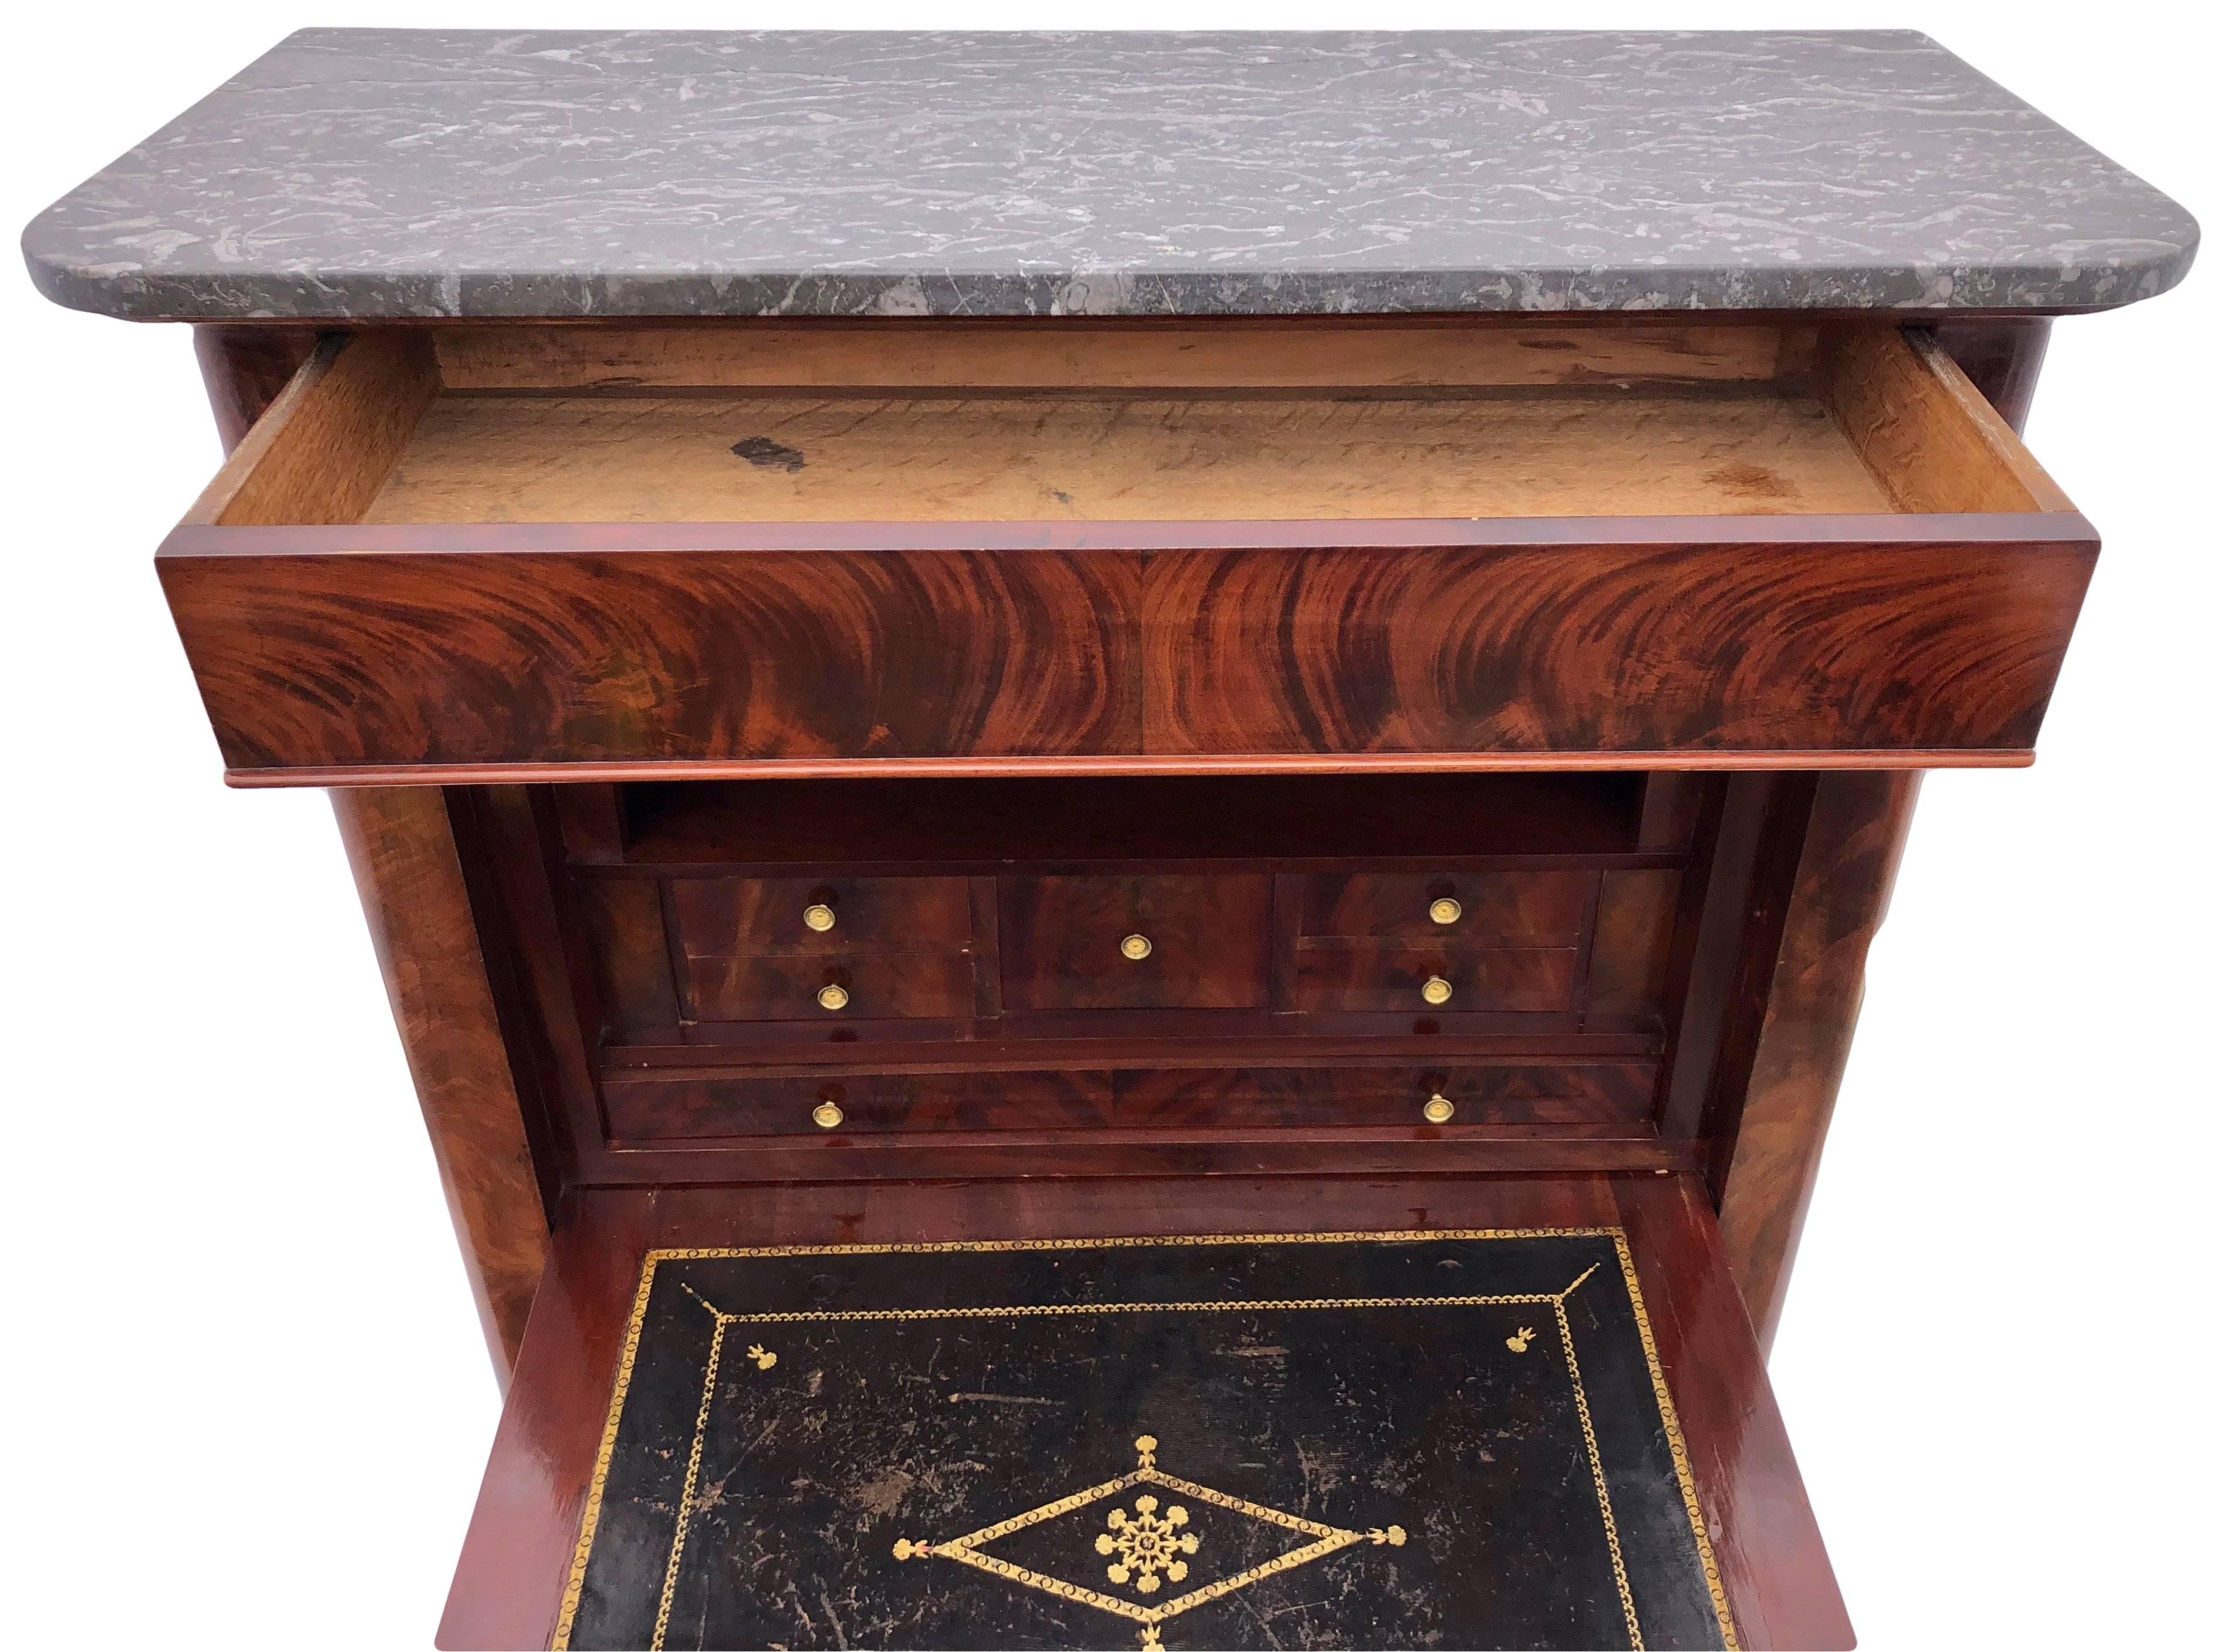 This lovely early 19th century French mahogany secrétaire à abattant has a drop front with fitted interior above six drawers with brass knobs. It is in very good condition and comes with its two original keys, one for the abattant and one for the